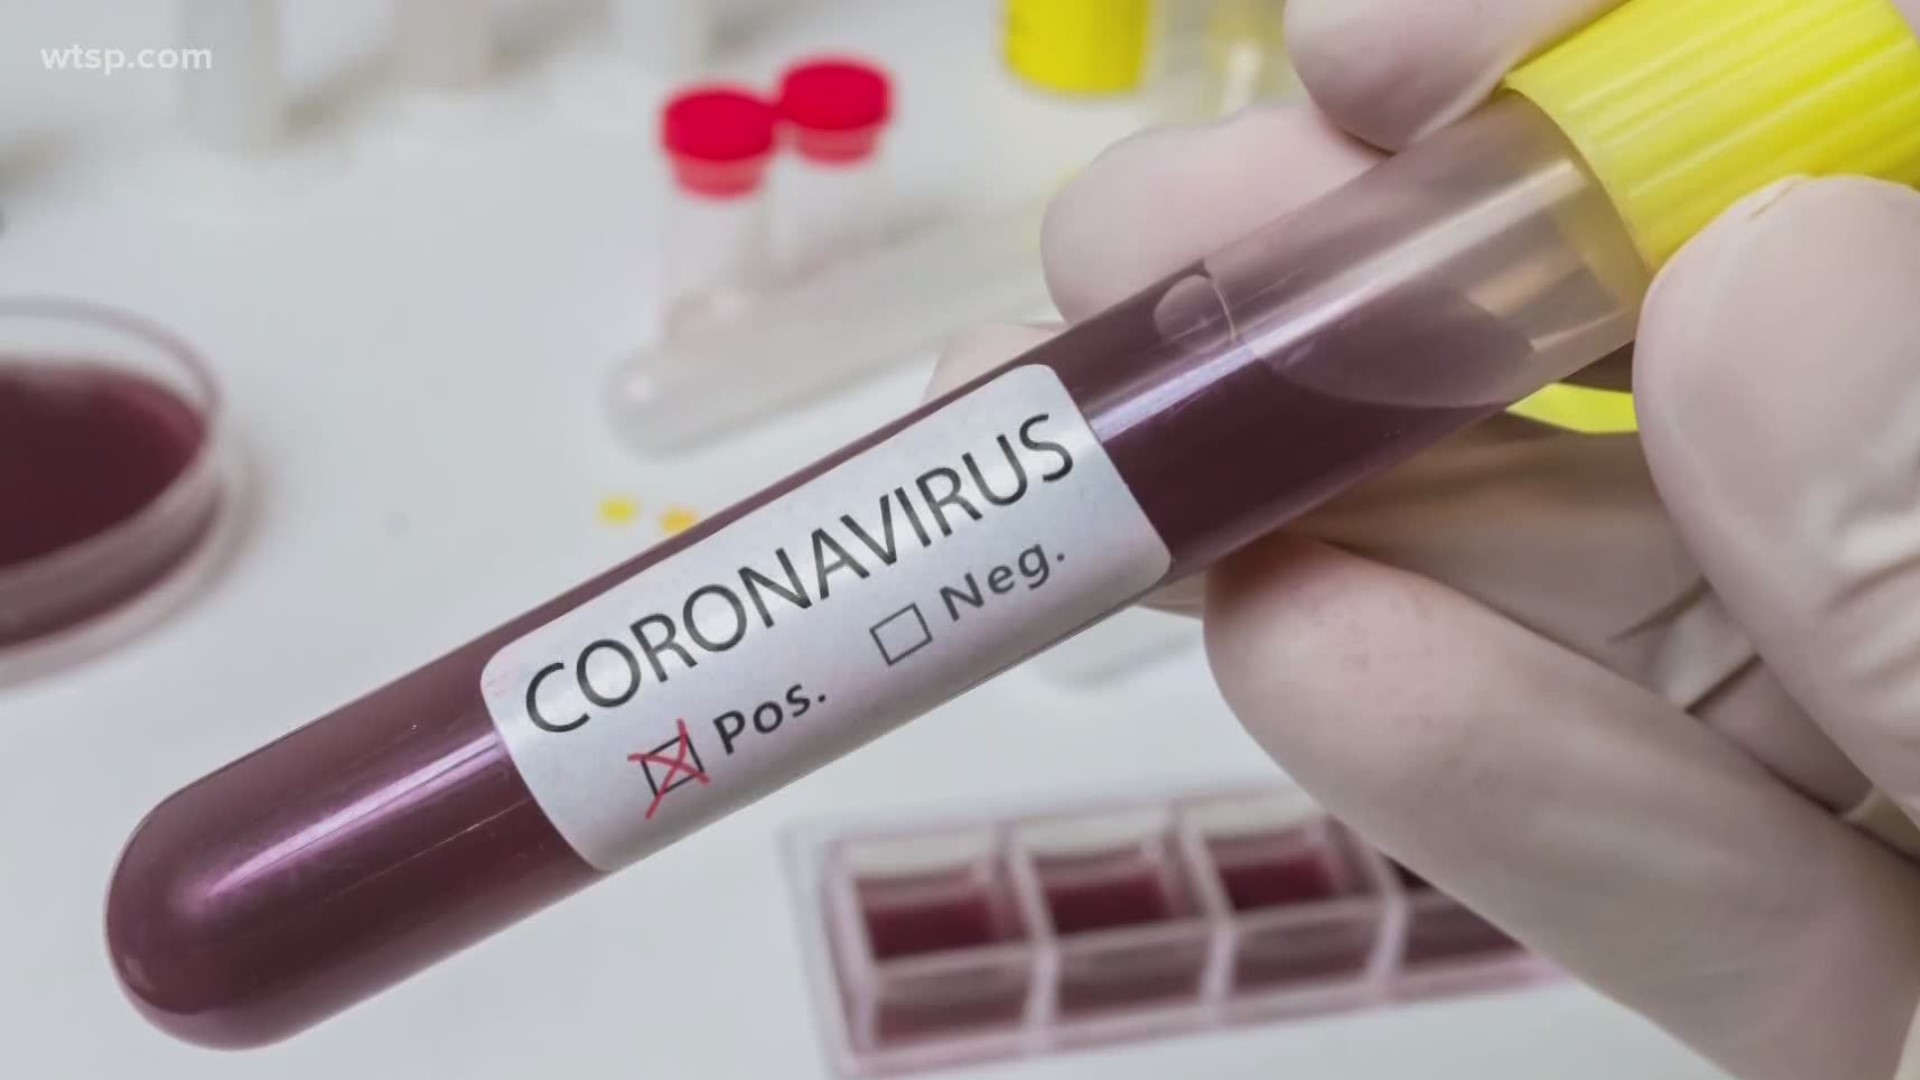 The state is now reporting a total of 200,111 confirmed coronavirus cases since the pandemic began.